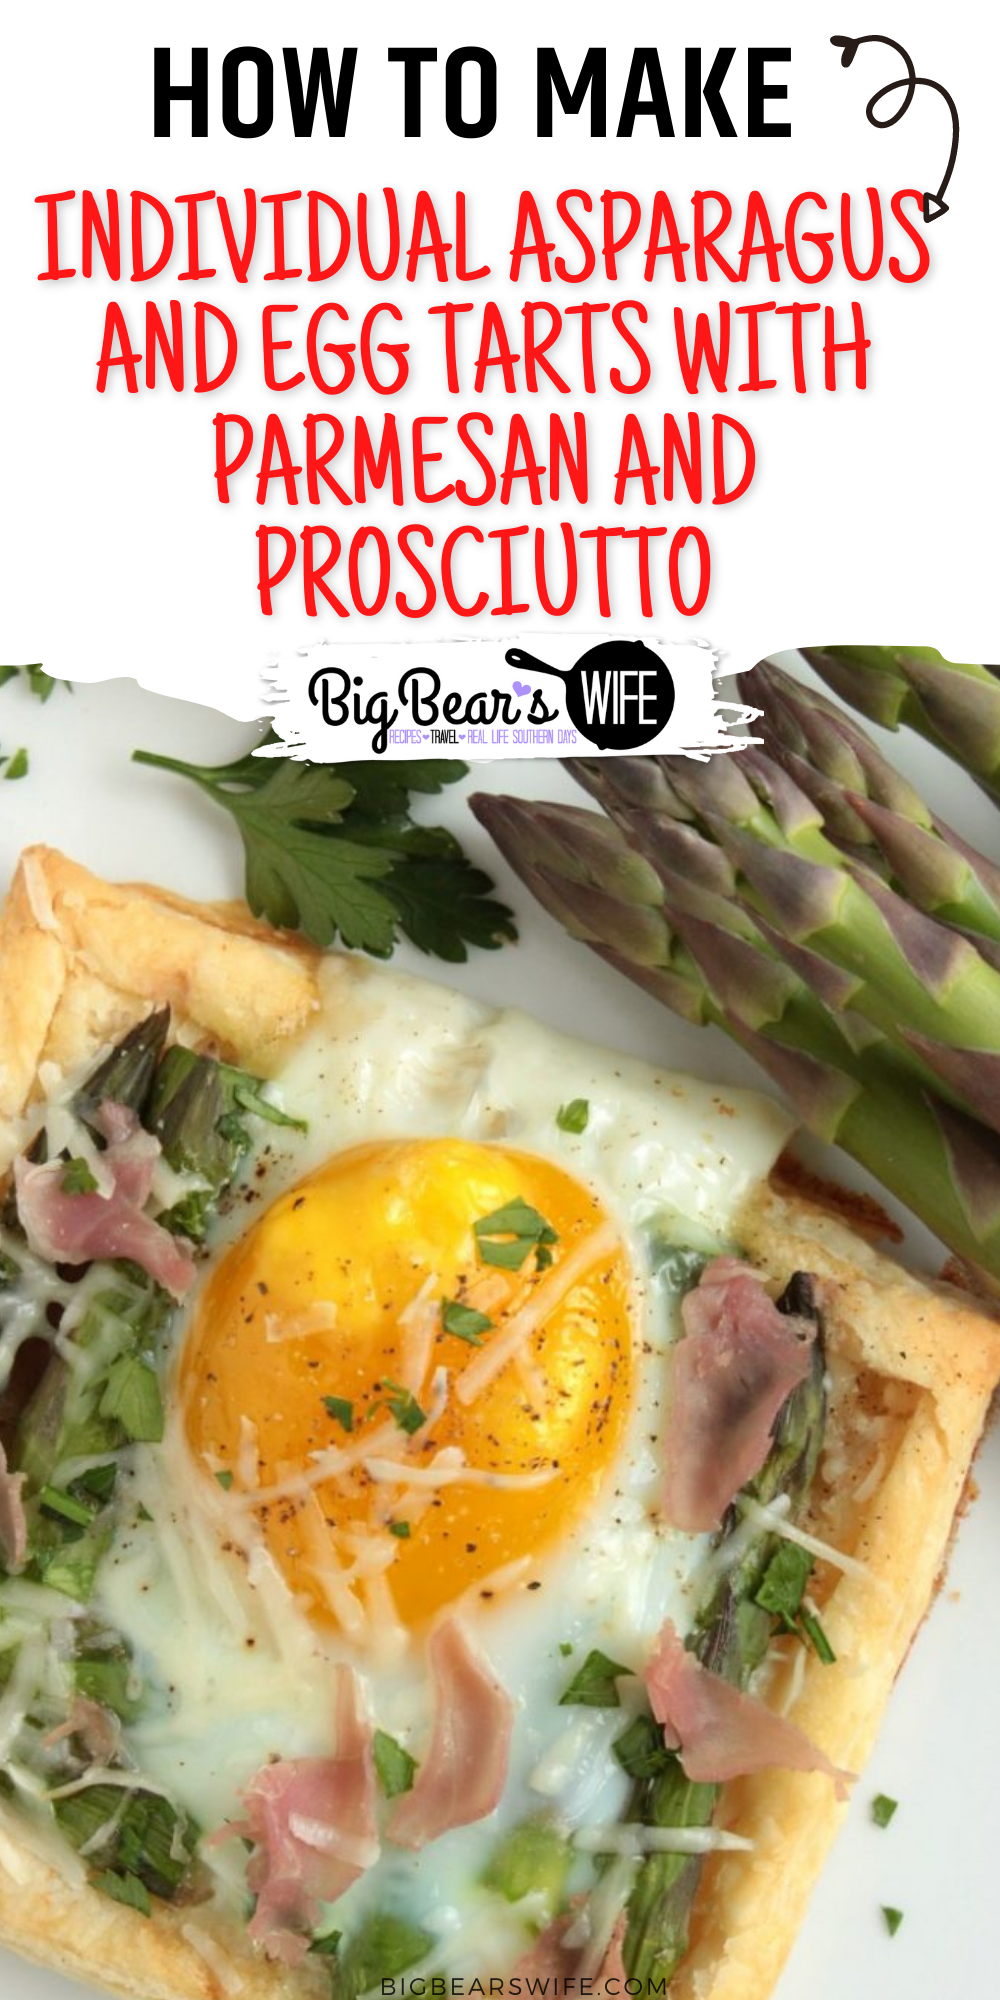 These Individual Asparagus and Egg Tarts with Parmesan and Prosciutto may look fancy, but you'll be amazed at how easy they are to put together!  via @bigbearswife